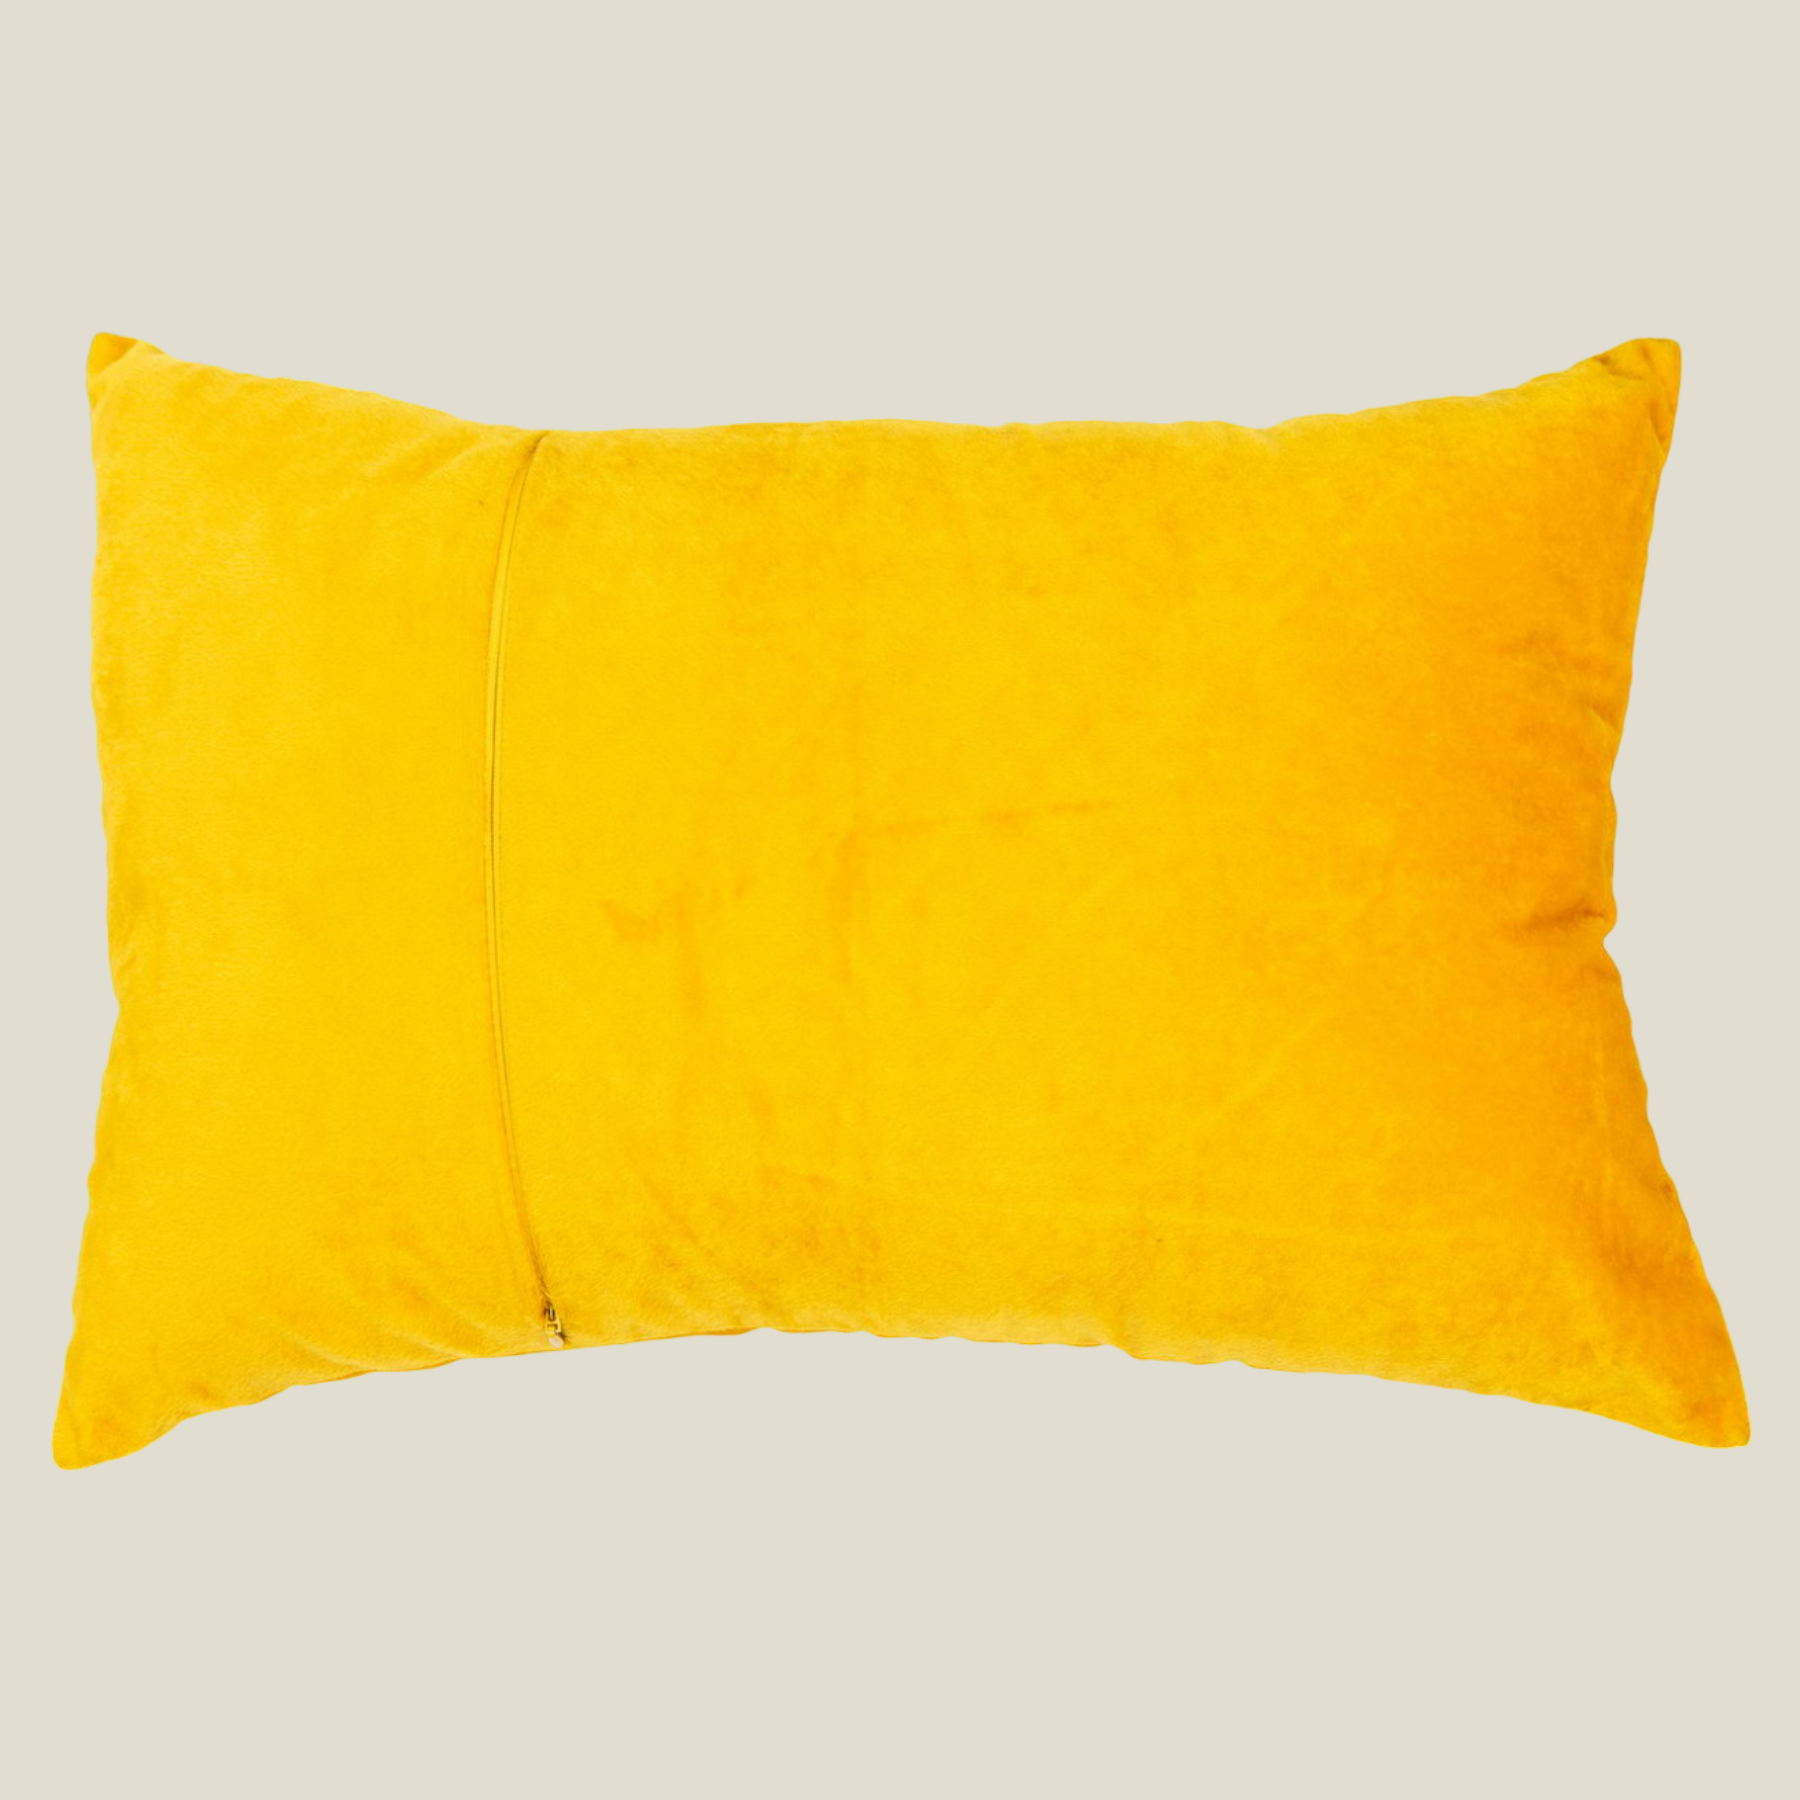 The Luxelife Handcrafted Yellow Velvet Cushion Cover (Floral Embroidery)